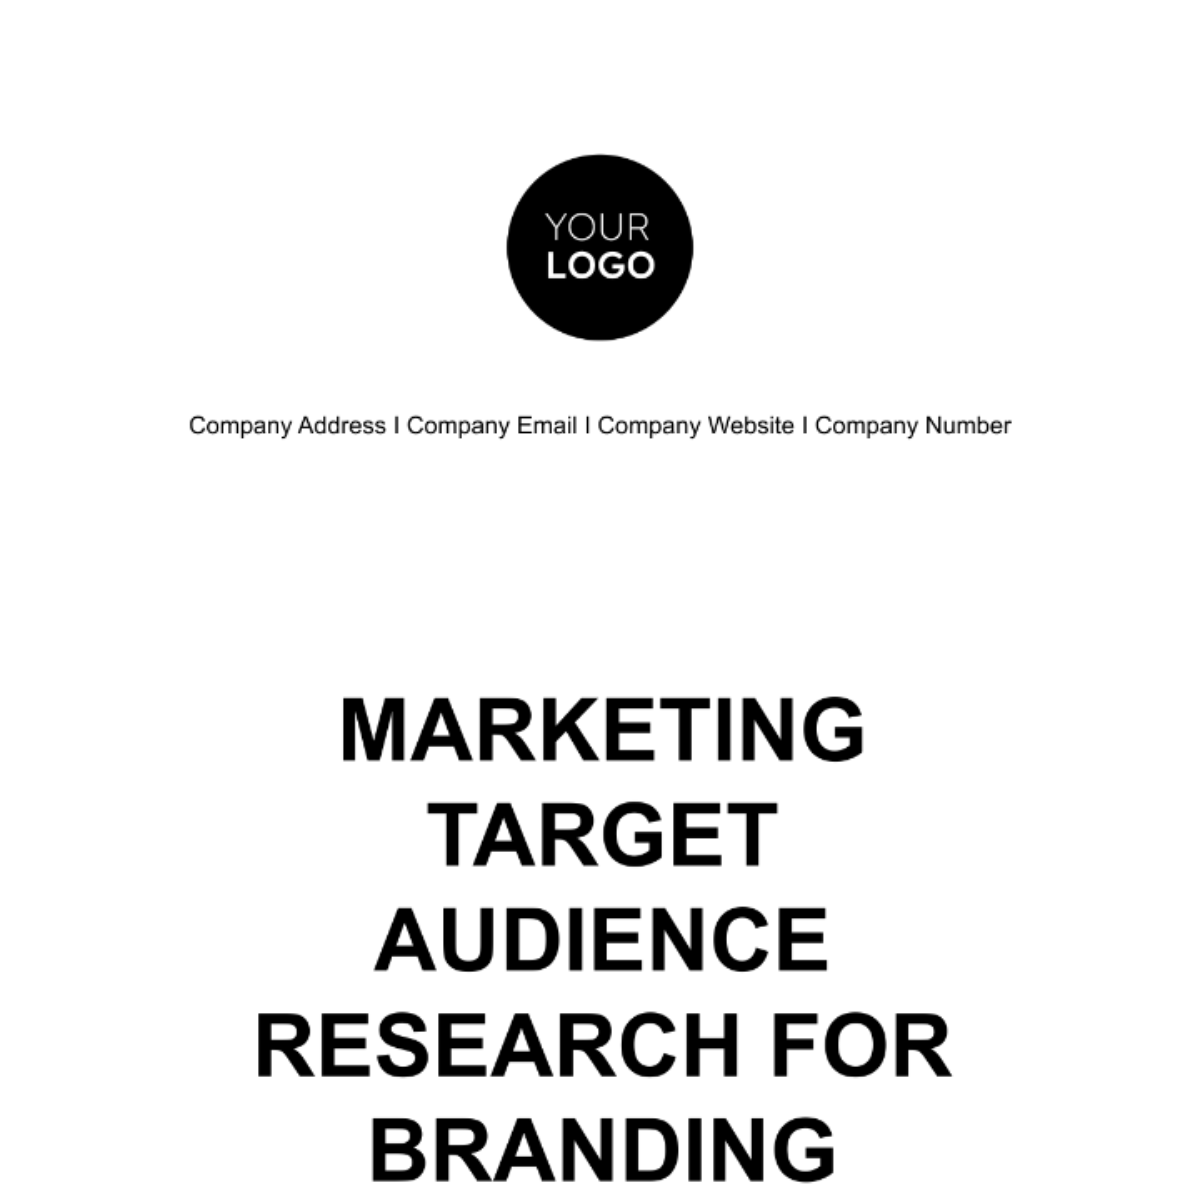 Marketing Target Audience Research for Branding Template